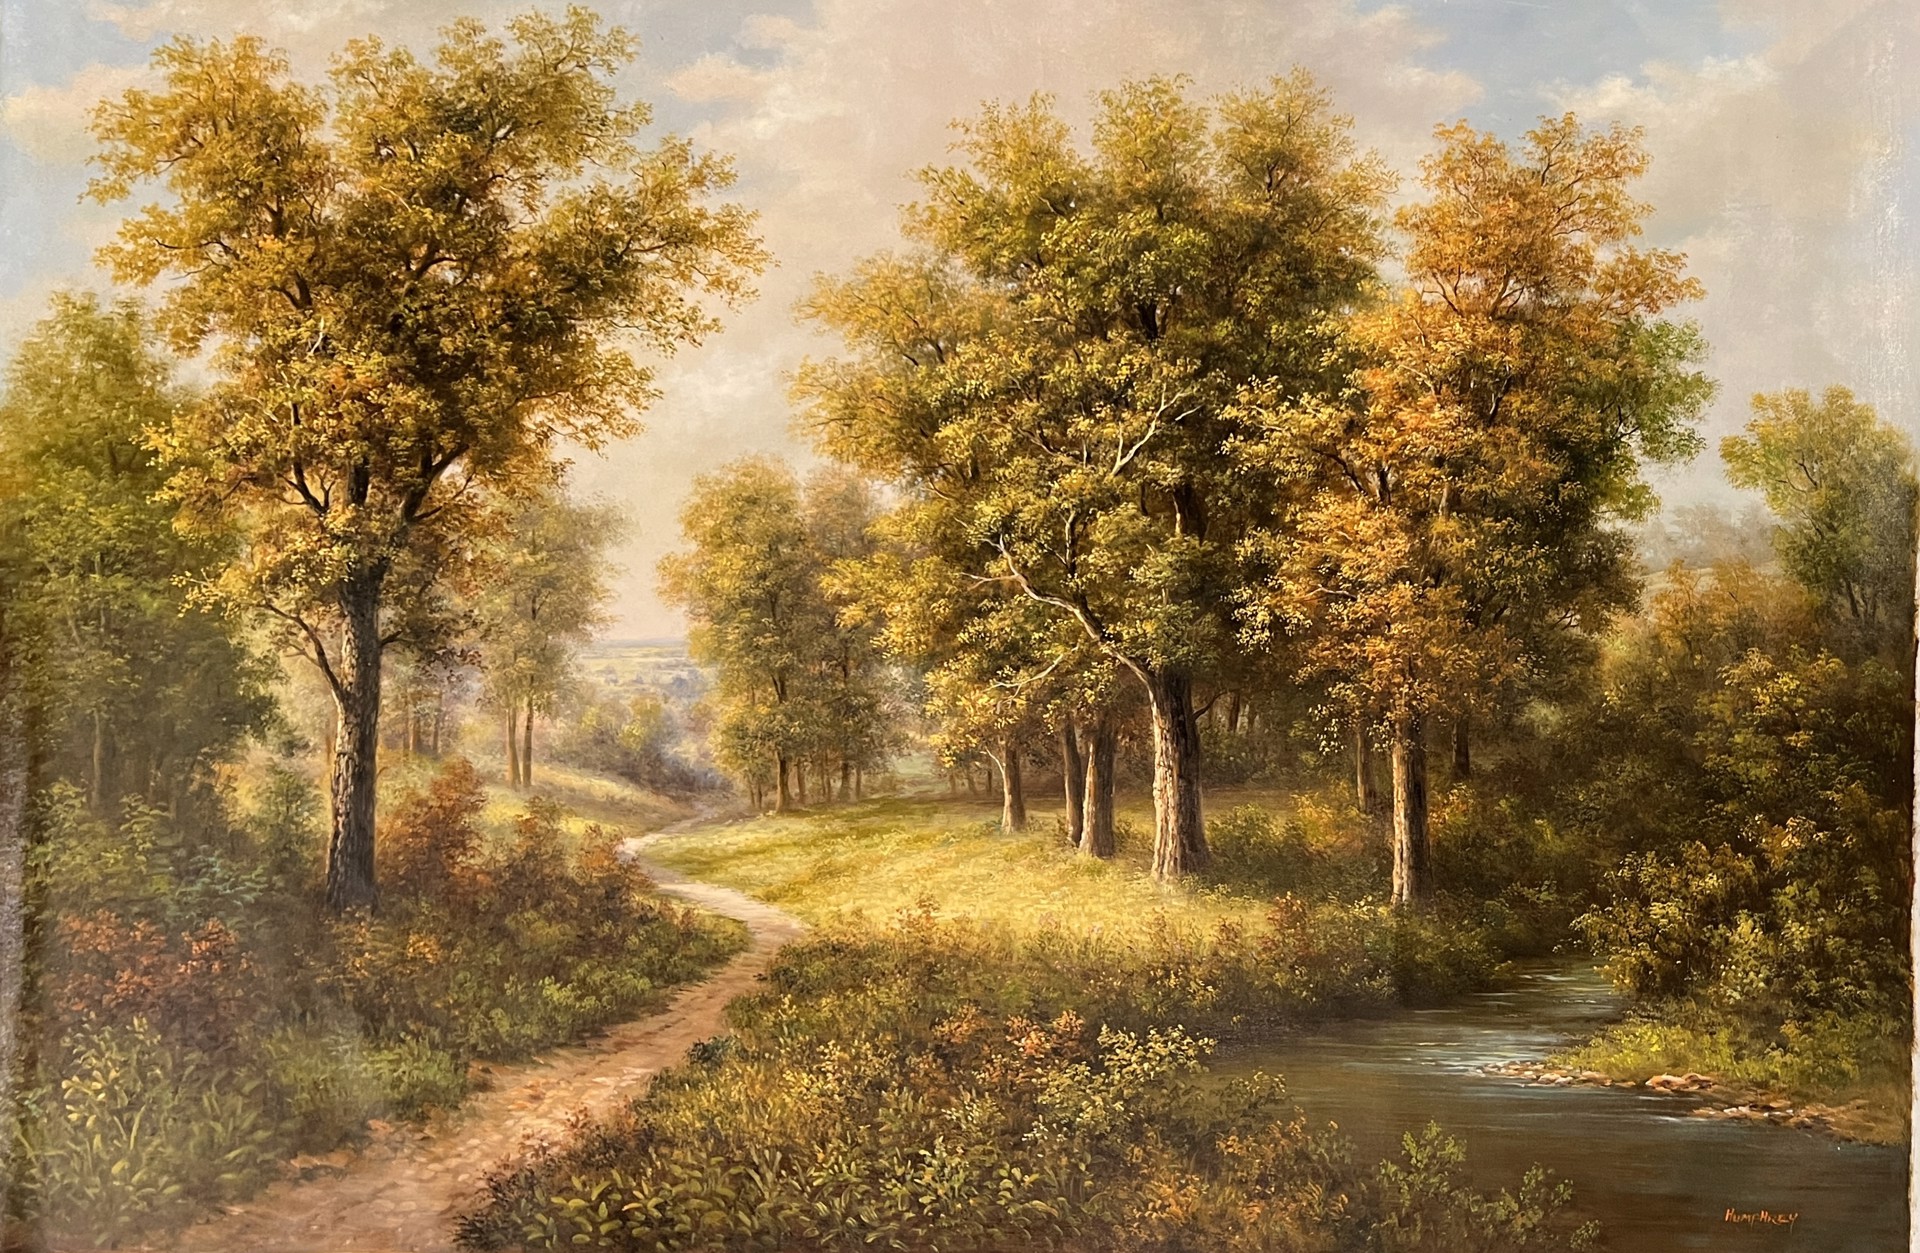 DOWNHILL PATH BY THE CREEK by HUMPHREY